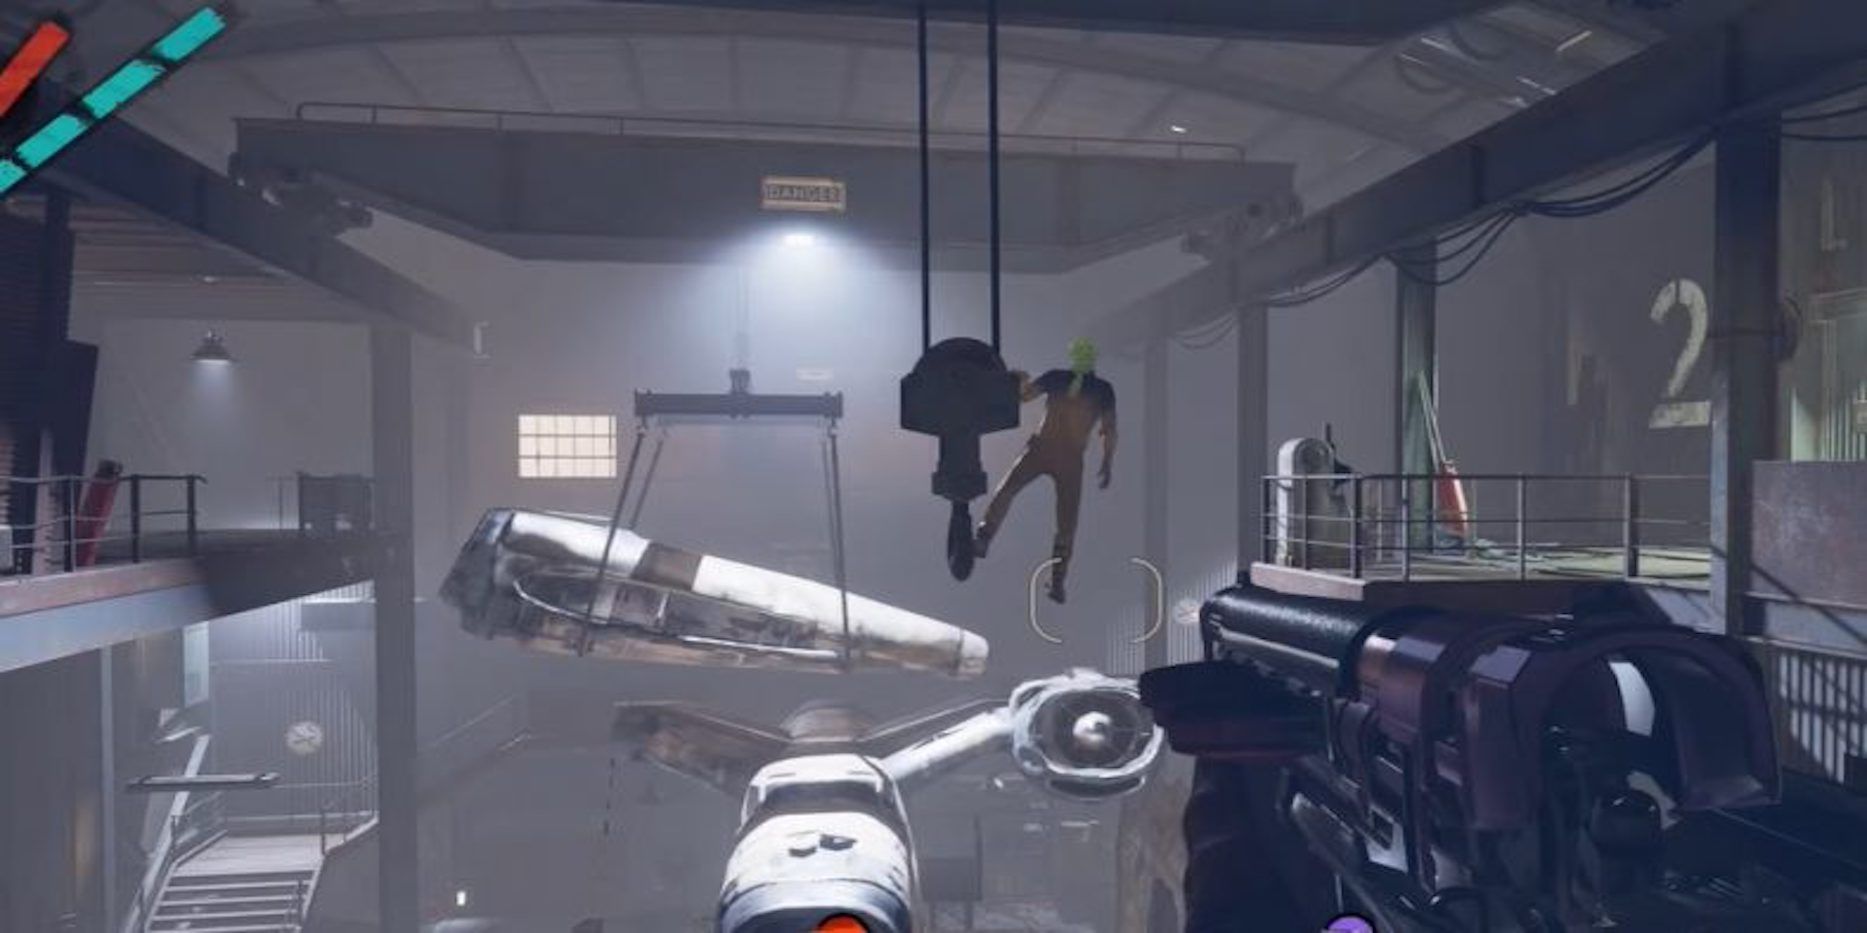 The mask maker dangling from a wire in Deathloop